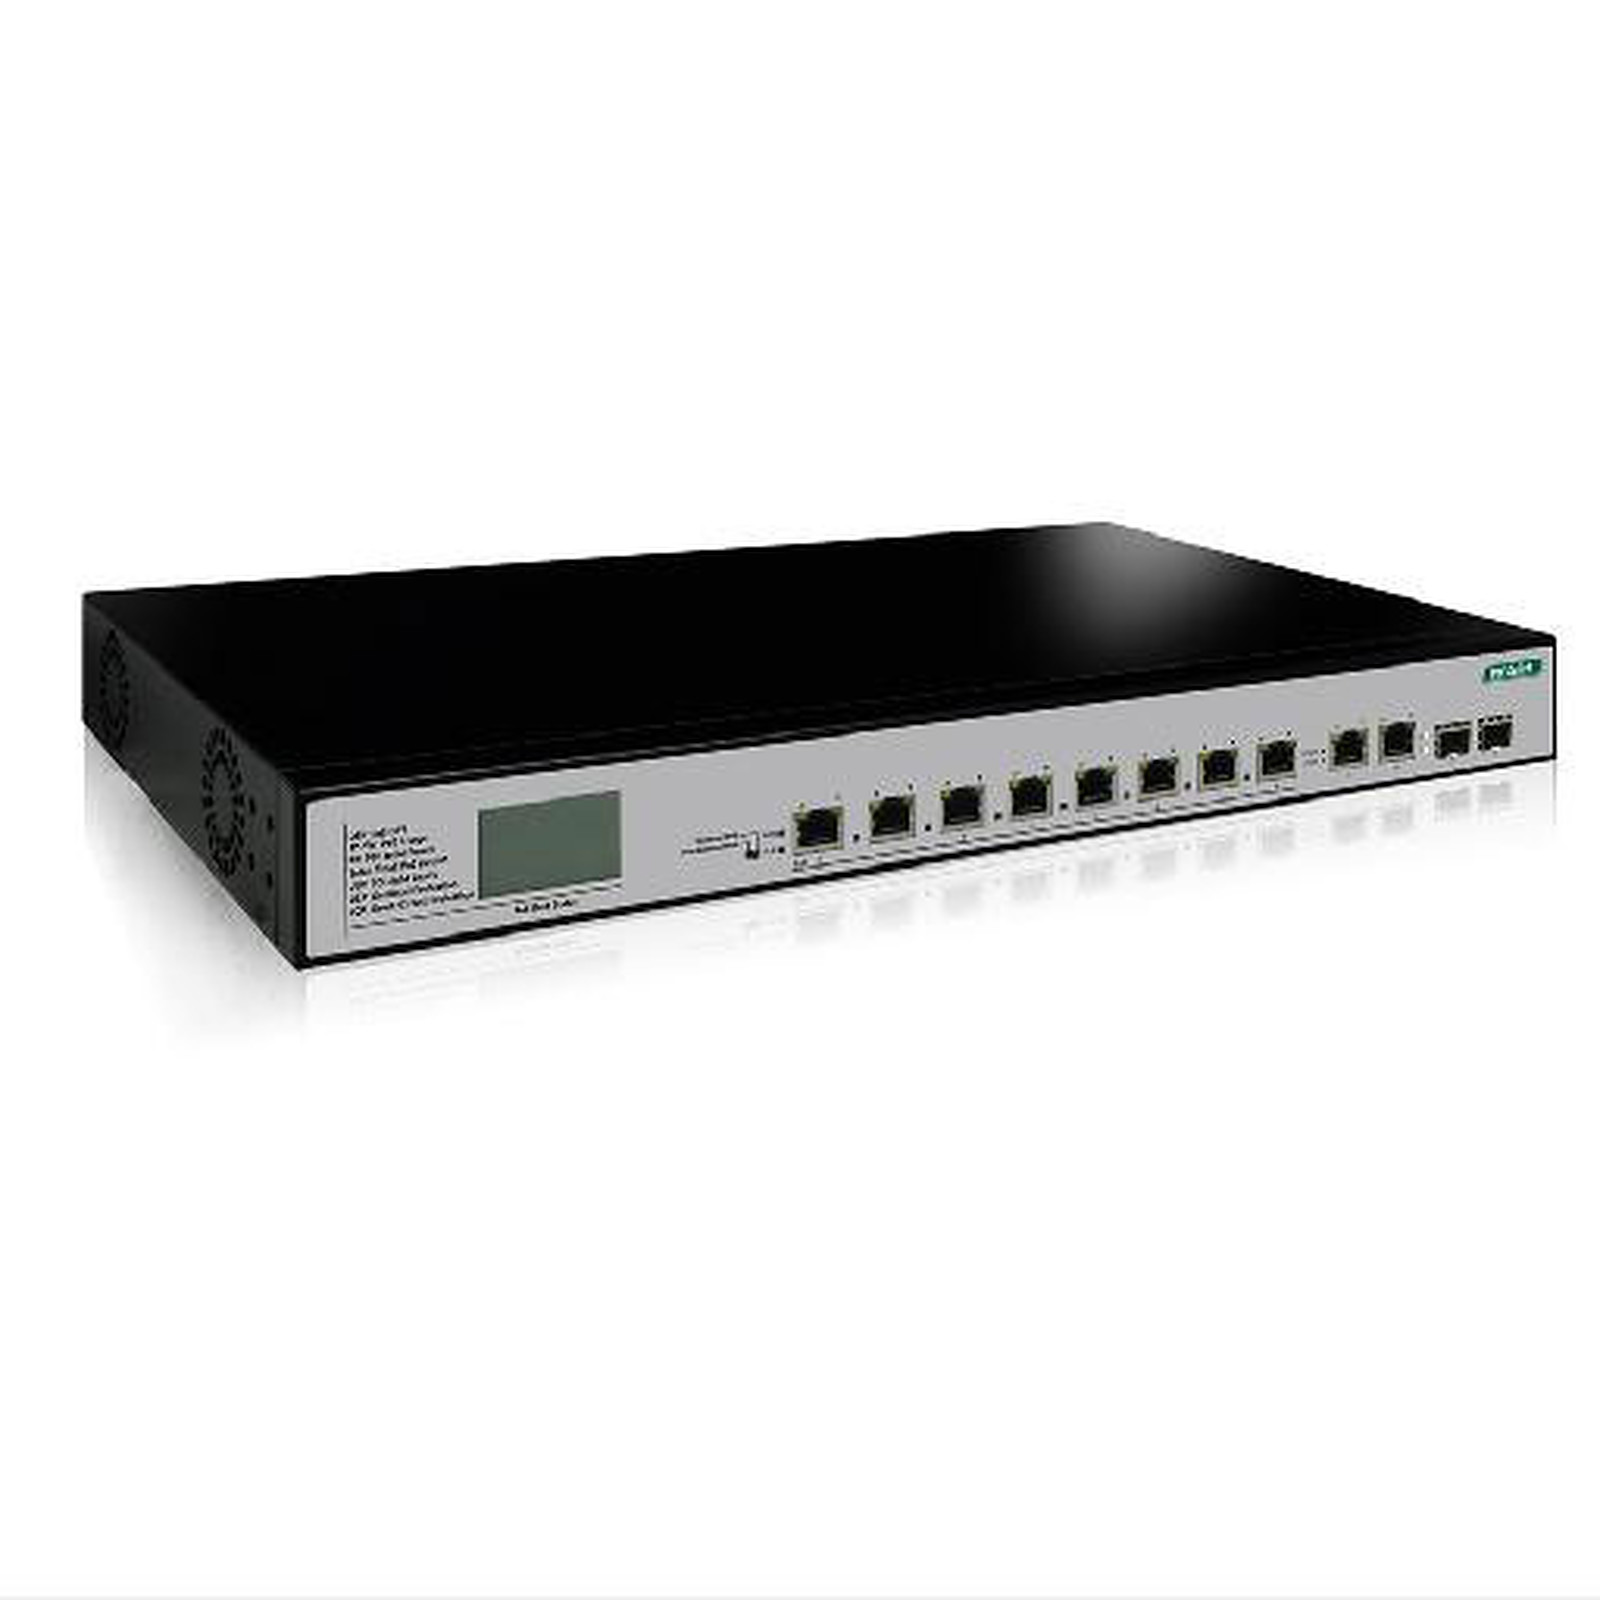 MCL Switch Gigabit PoE Rackable (8+2 ports + 2 SFP) - Switch MCL